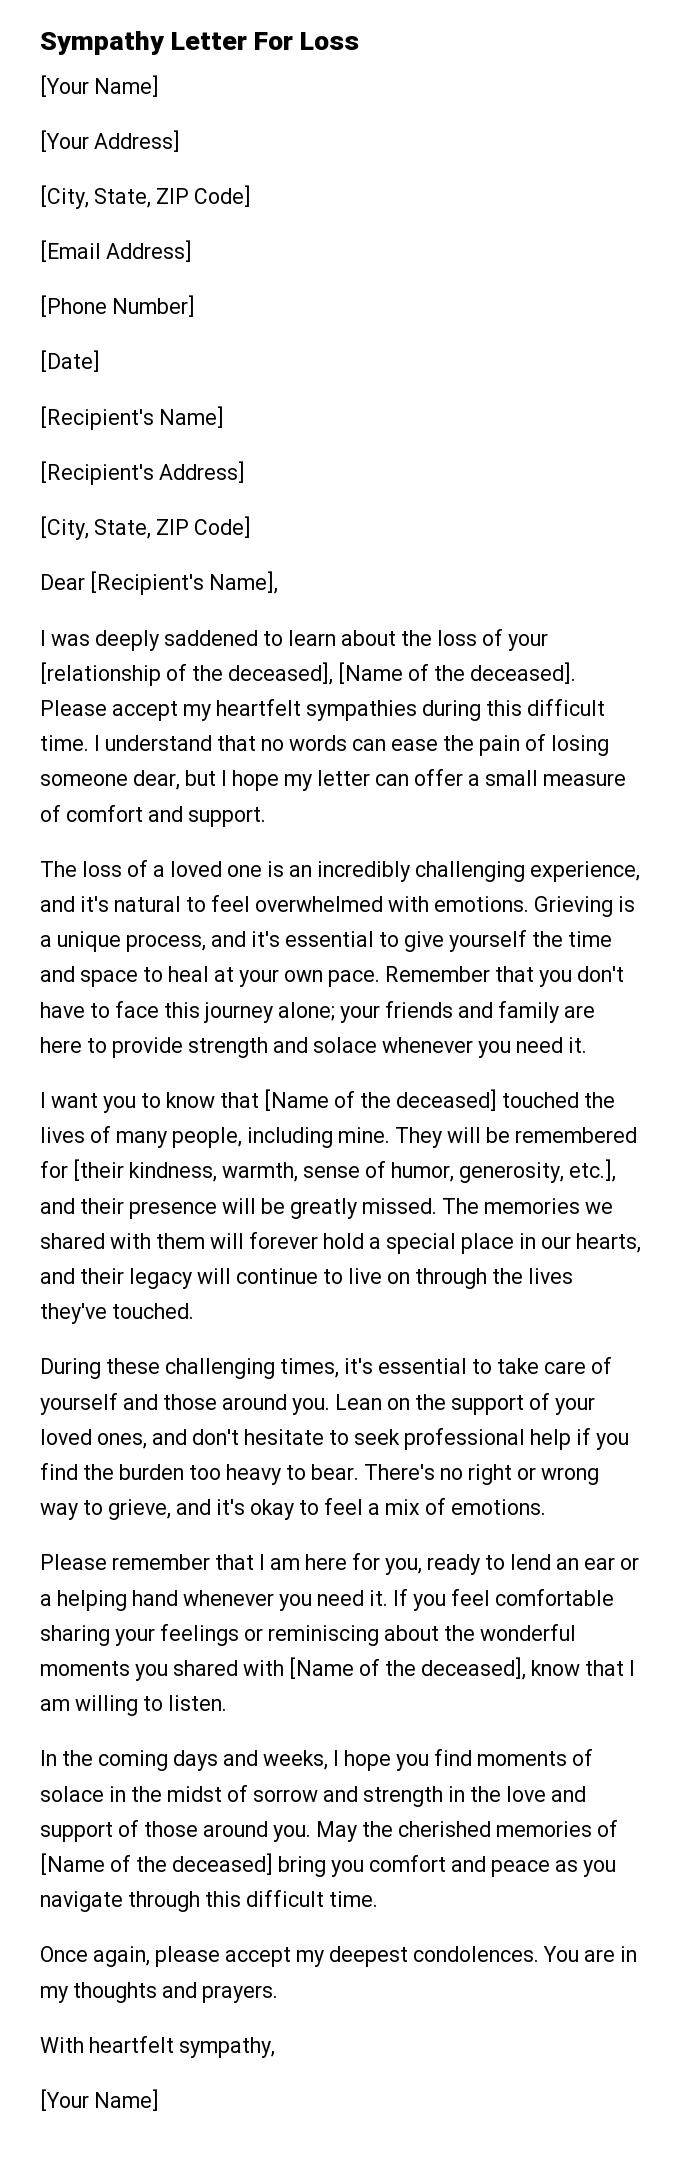 Sympathy Letter For Loss